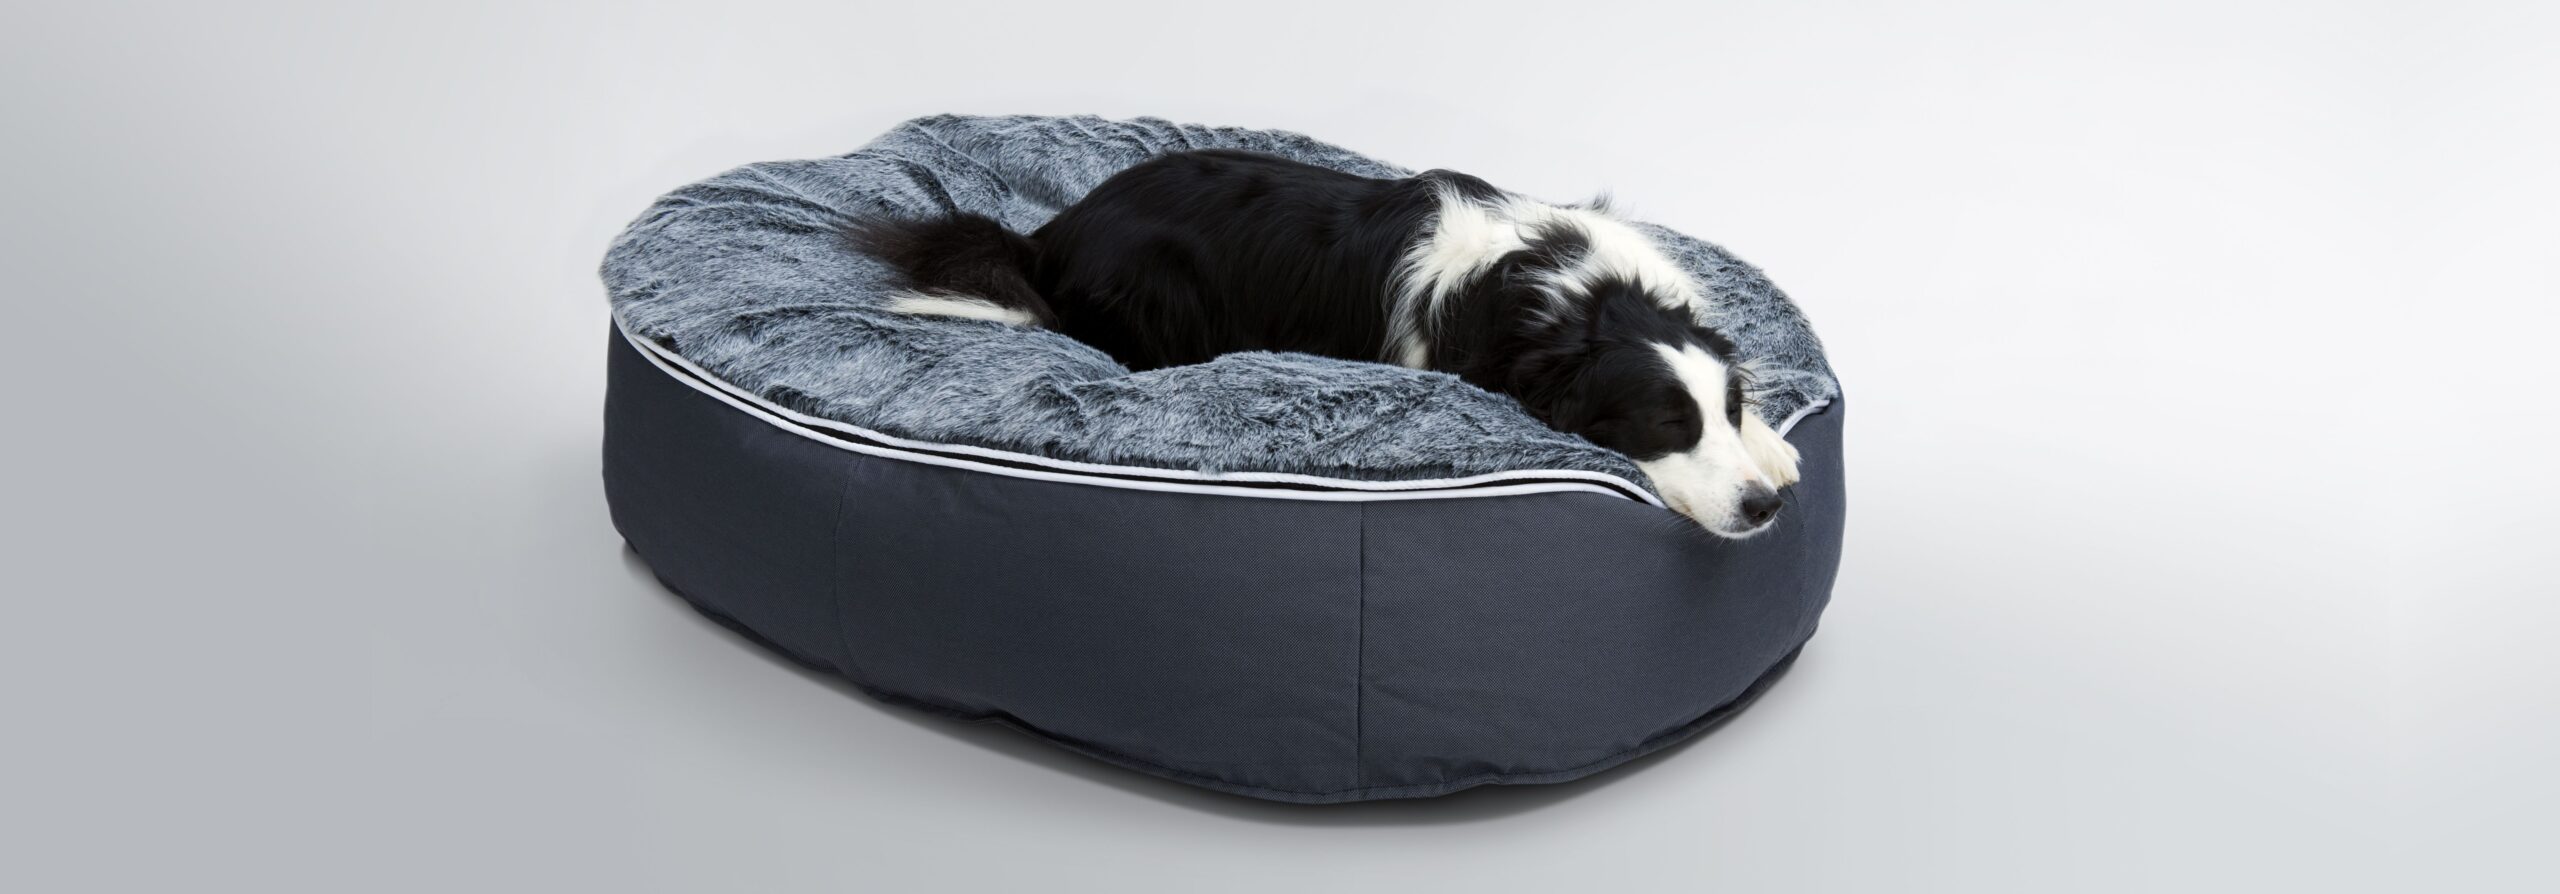 How to Choose a Luxury Cloudy Bed at Pet Bed Store